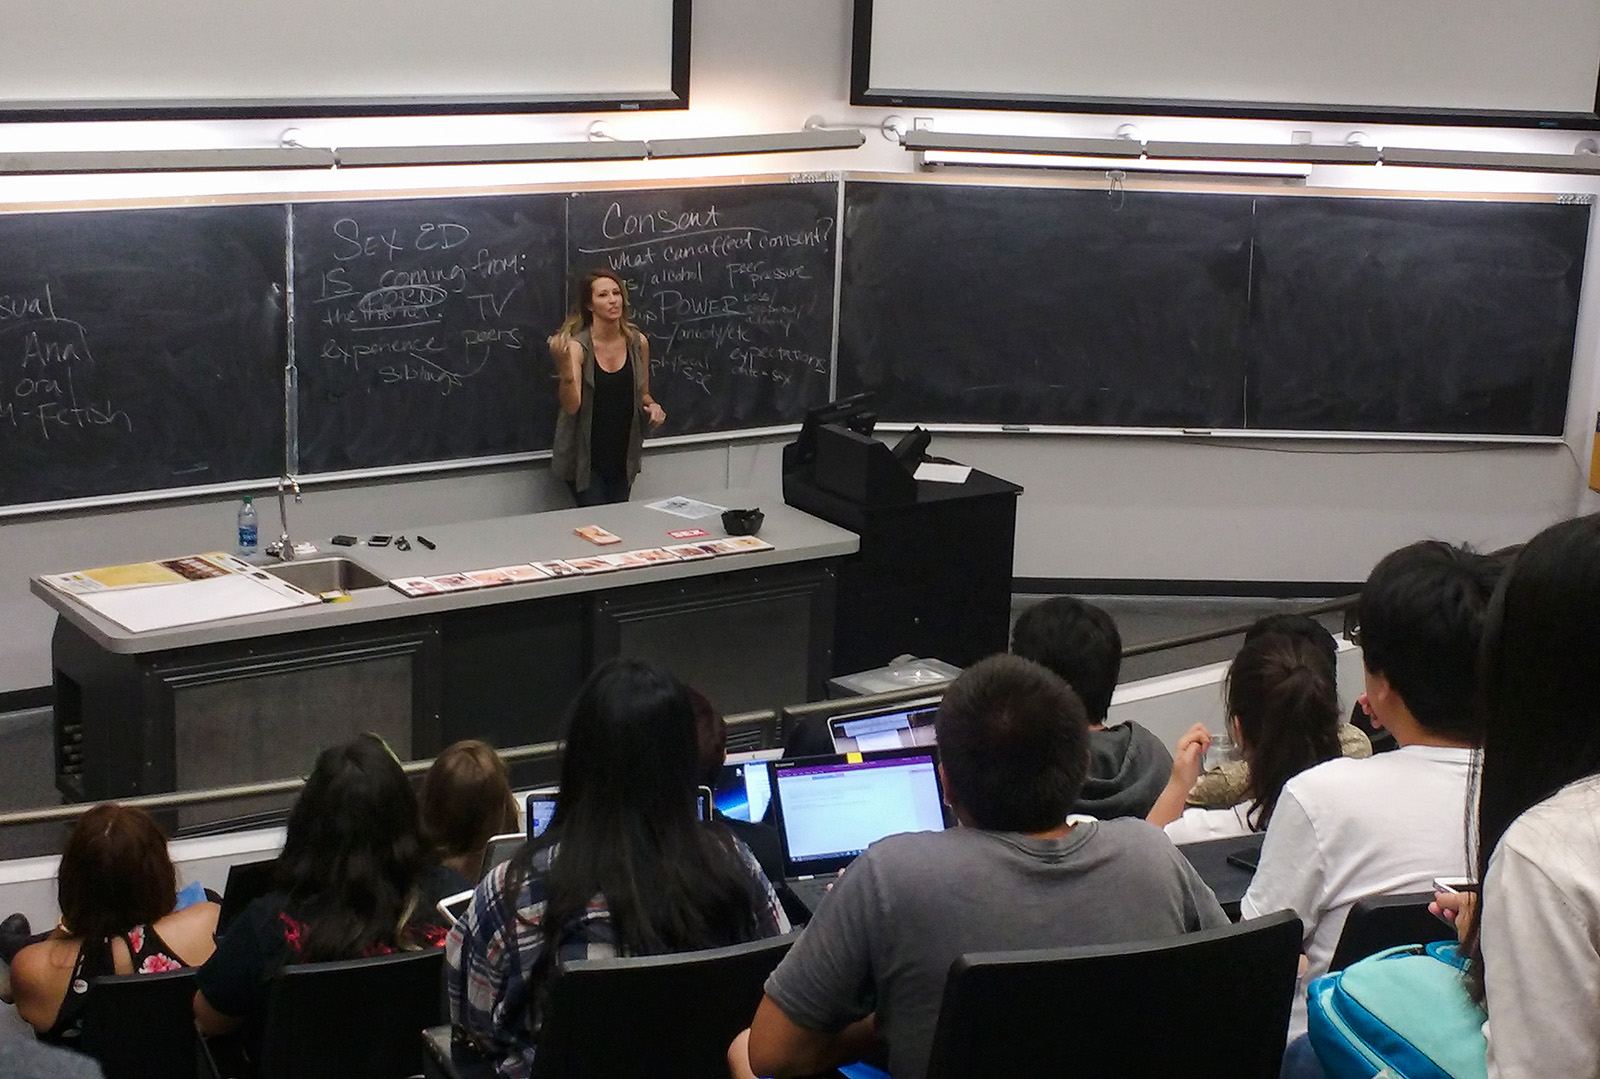 Sex Tchar - Adult film star speaks to psychology class about sex, pornography - Daily  Bruin